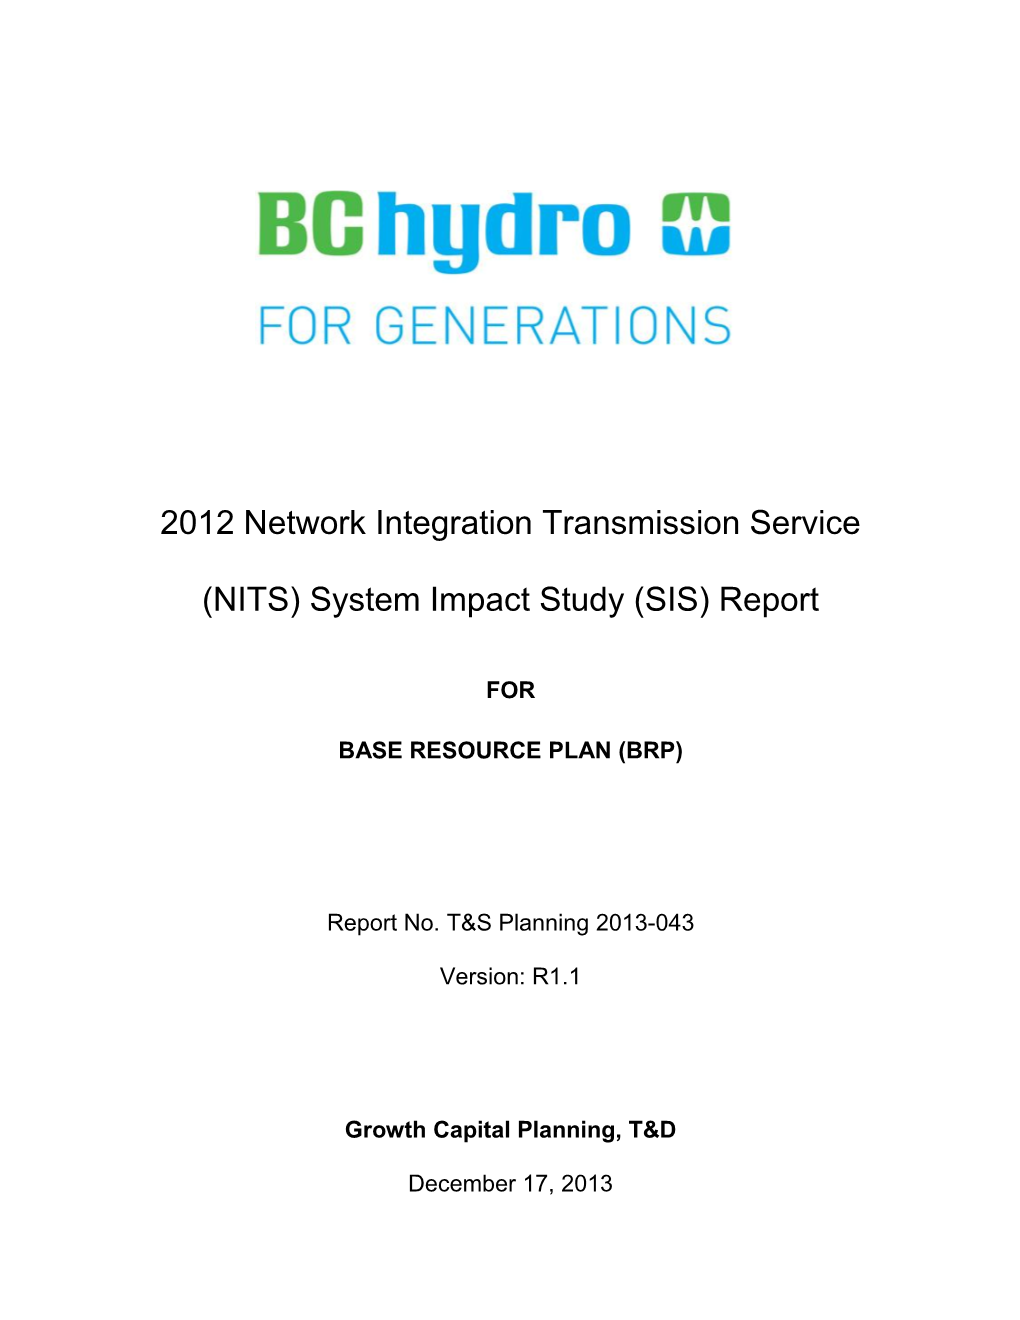 System Impact Study (SIS) Report